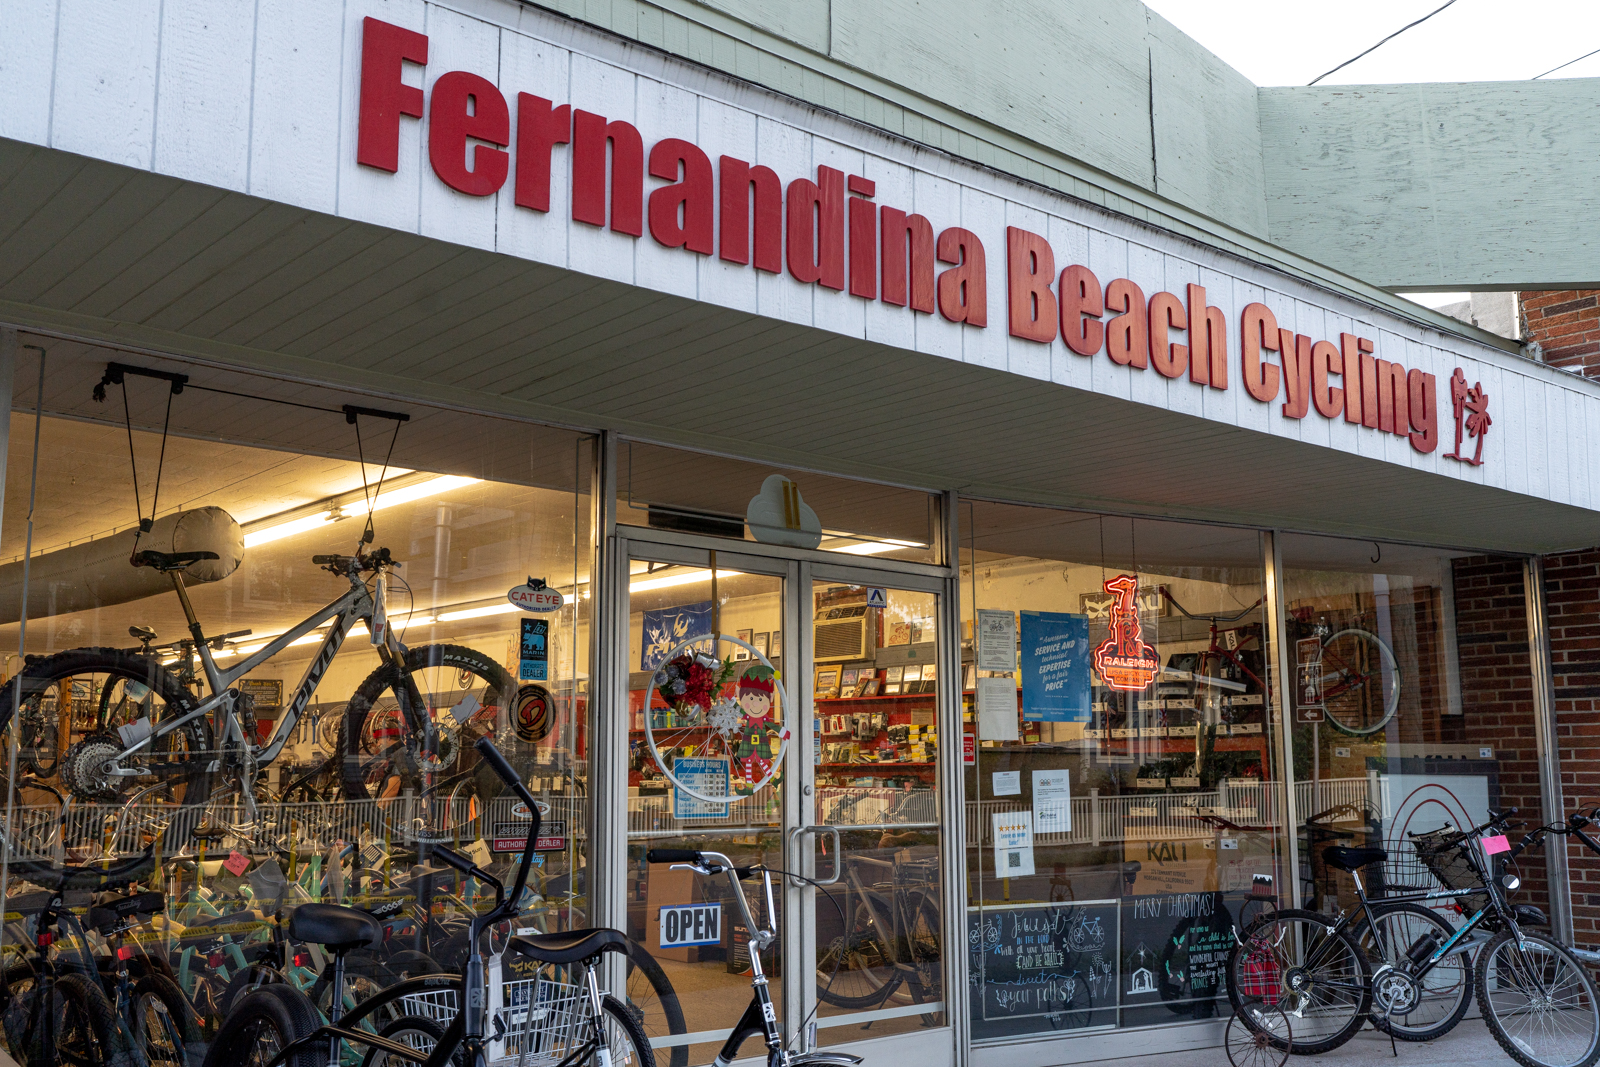 This is a photo of the Fernandina Beach Cycling store. There are bikes in the big glass shop windows and several bikes parked outside. There is an open sign on the door and a Christmas elf as well. Above the glass windows and doors are red letters and the logo of Fernandina Beach Cycling.